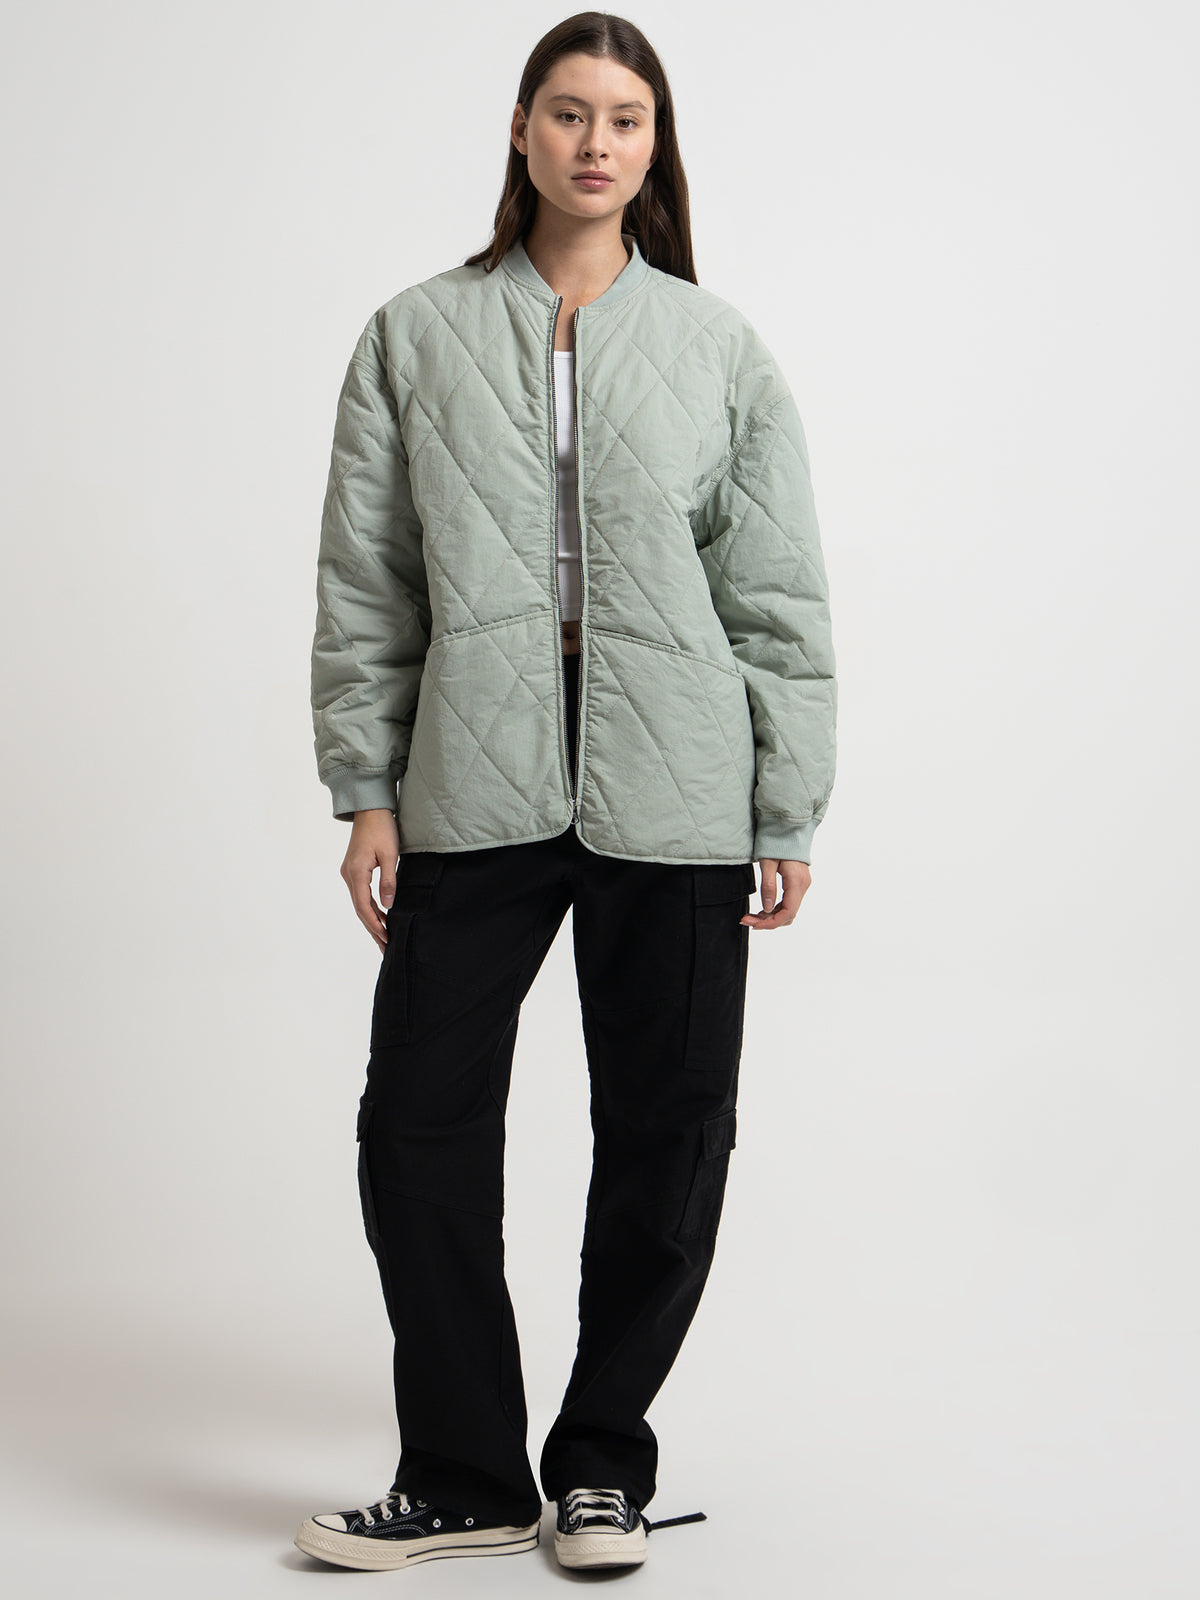 Dice Quilted Jacket in Sage